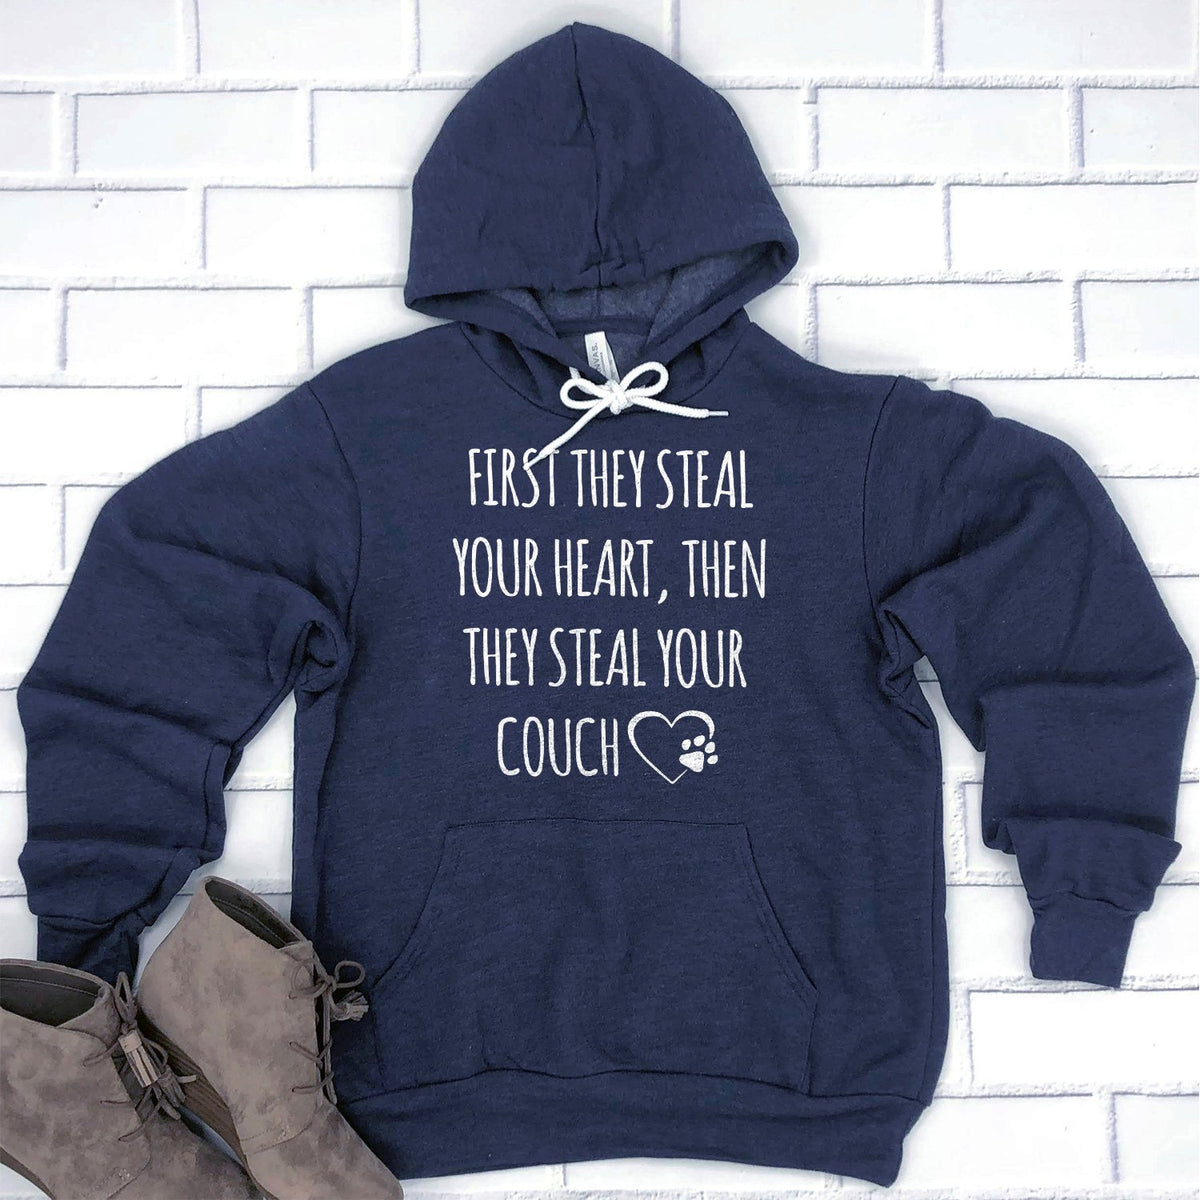 First They Steal Your Heart, Then They Steal Your Couch - Hoodie Sweatshirt